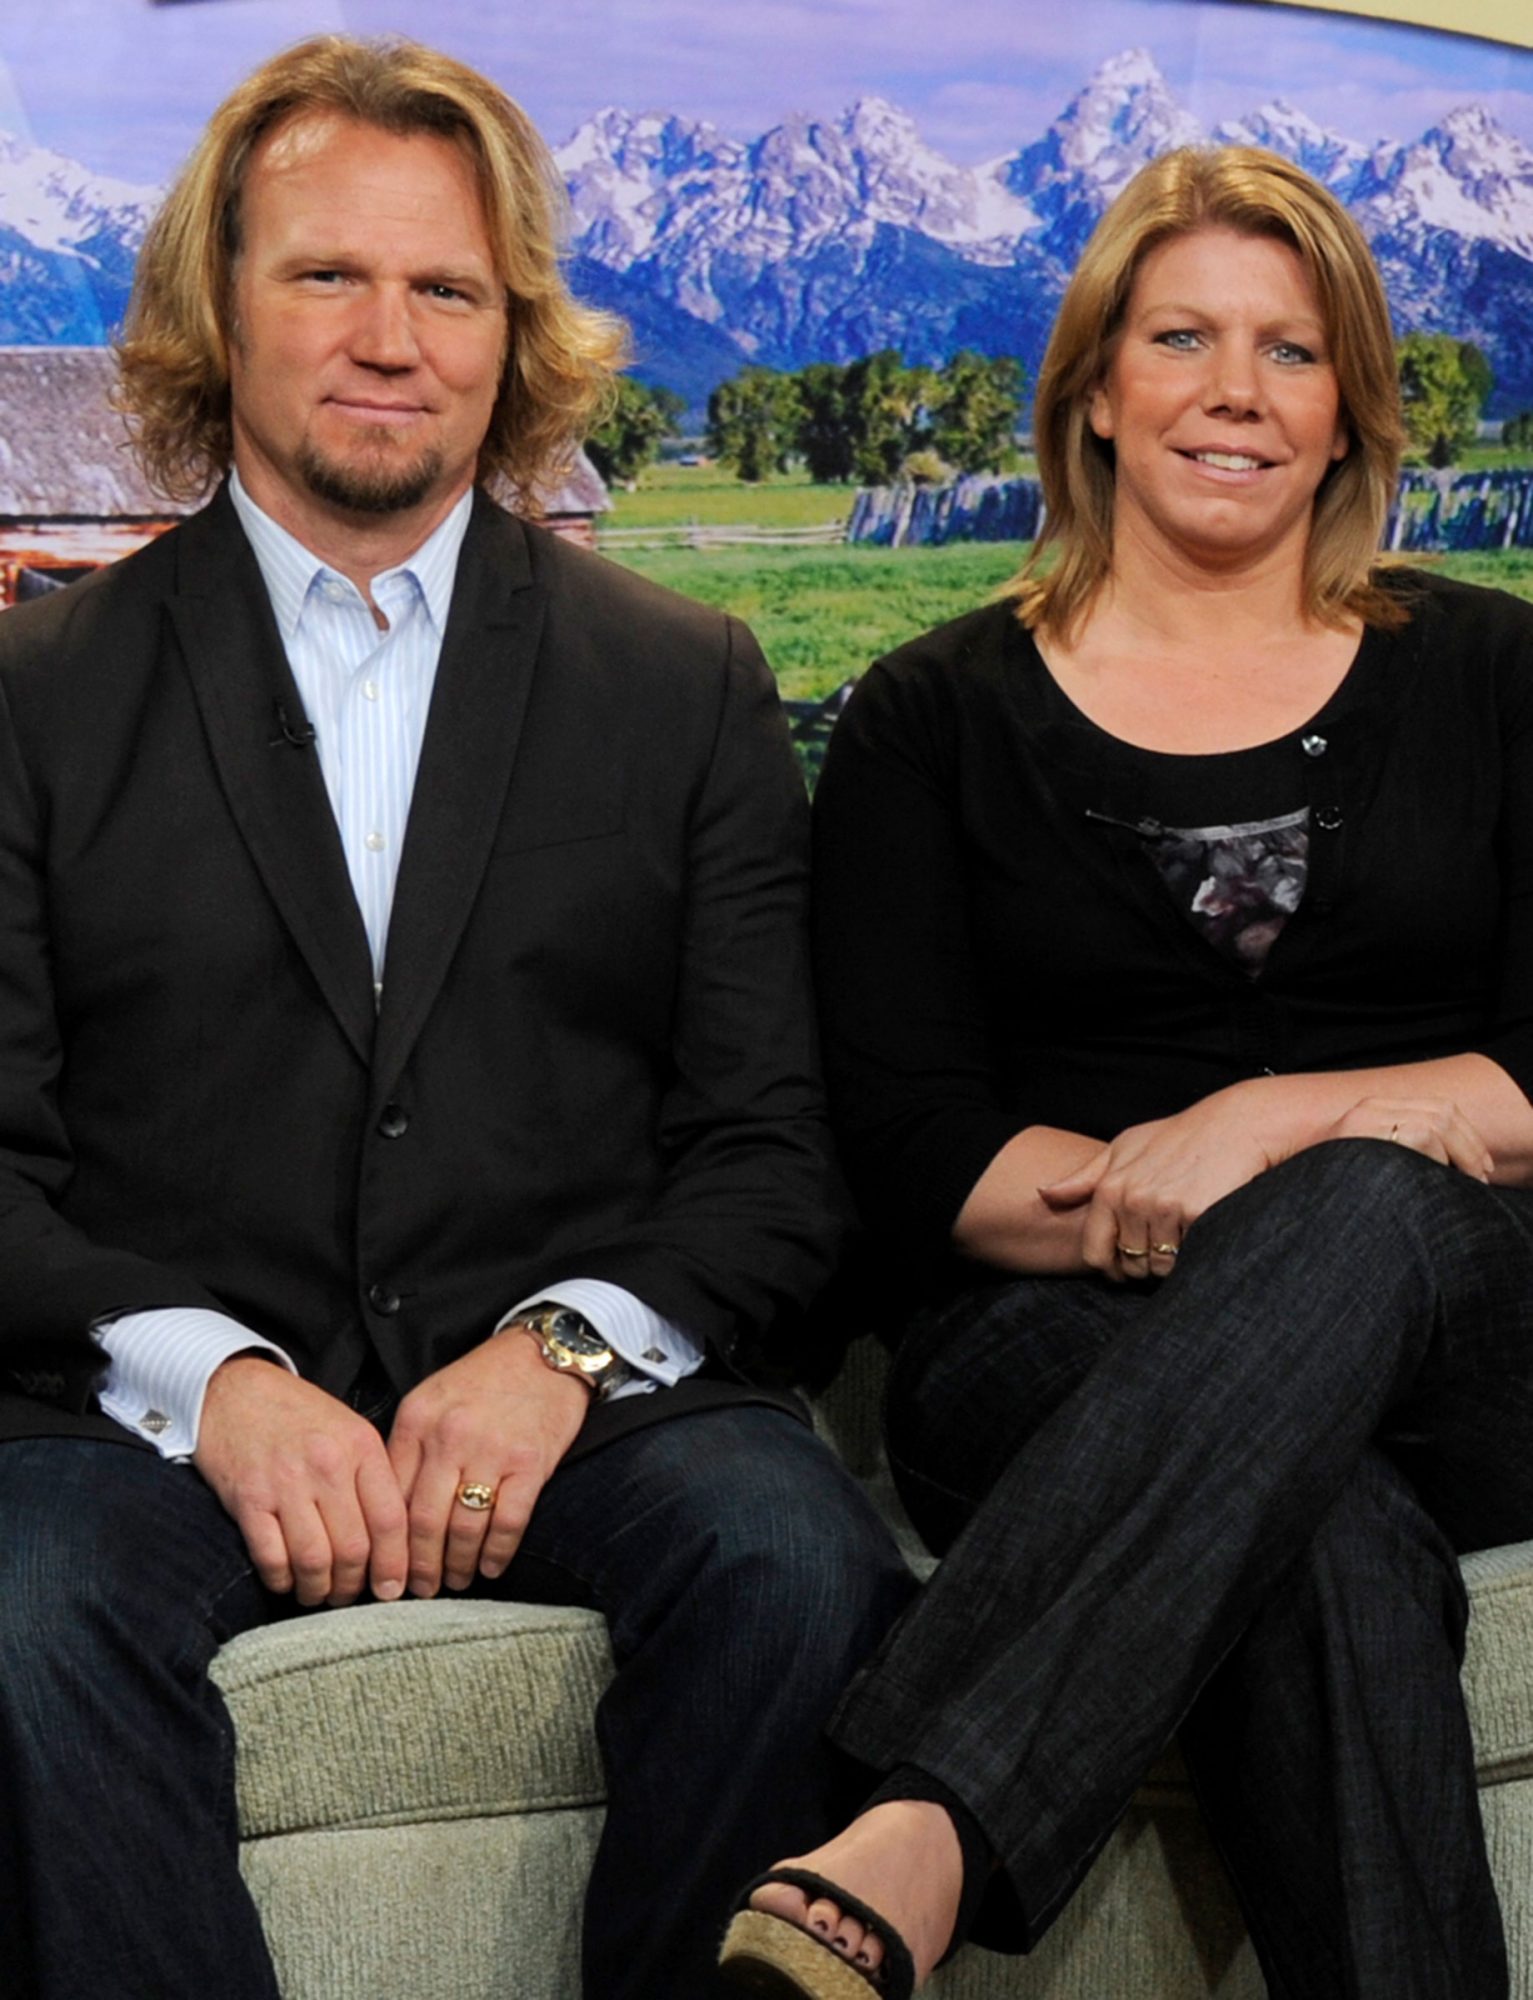 Sister Wives' Kody and Meri Brown Celebrate Their 'Non-Anniversary': 'We're Not a Couple'